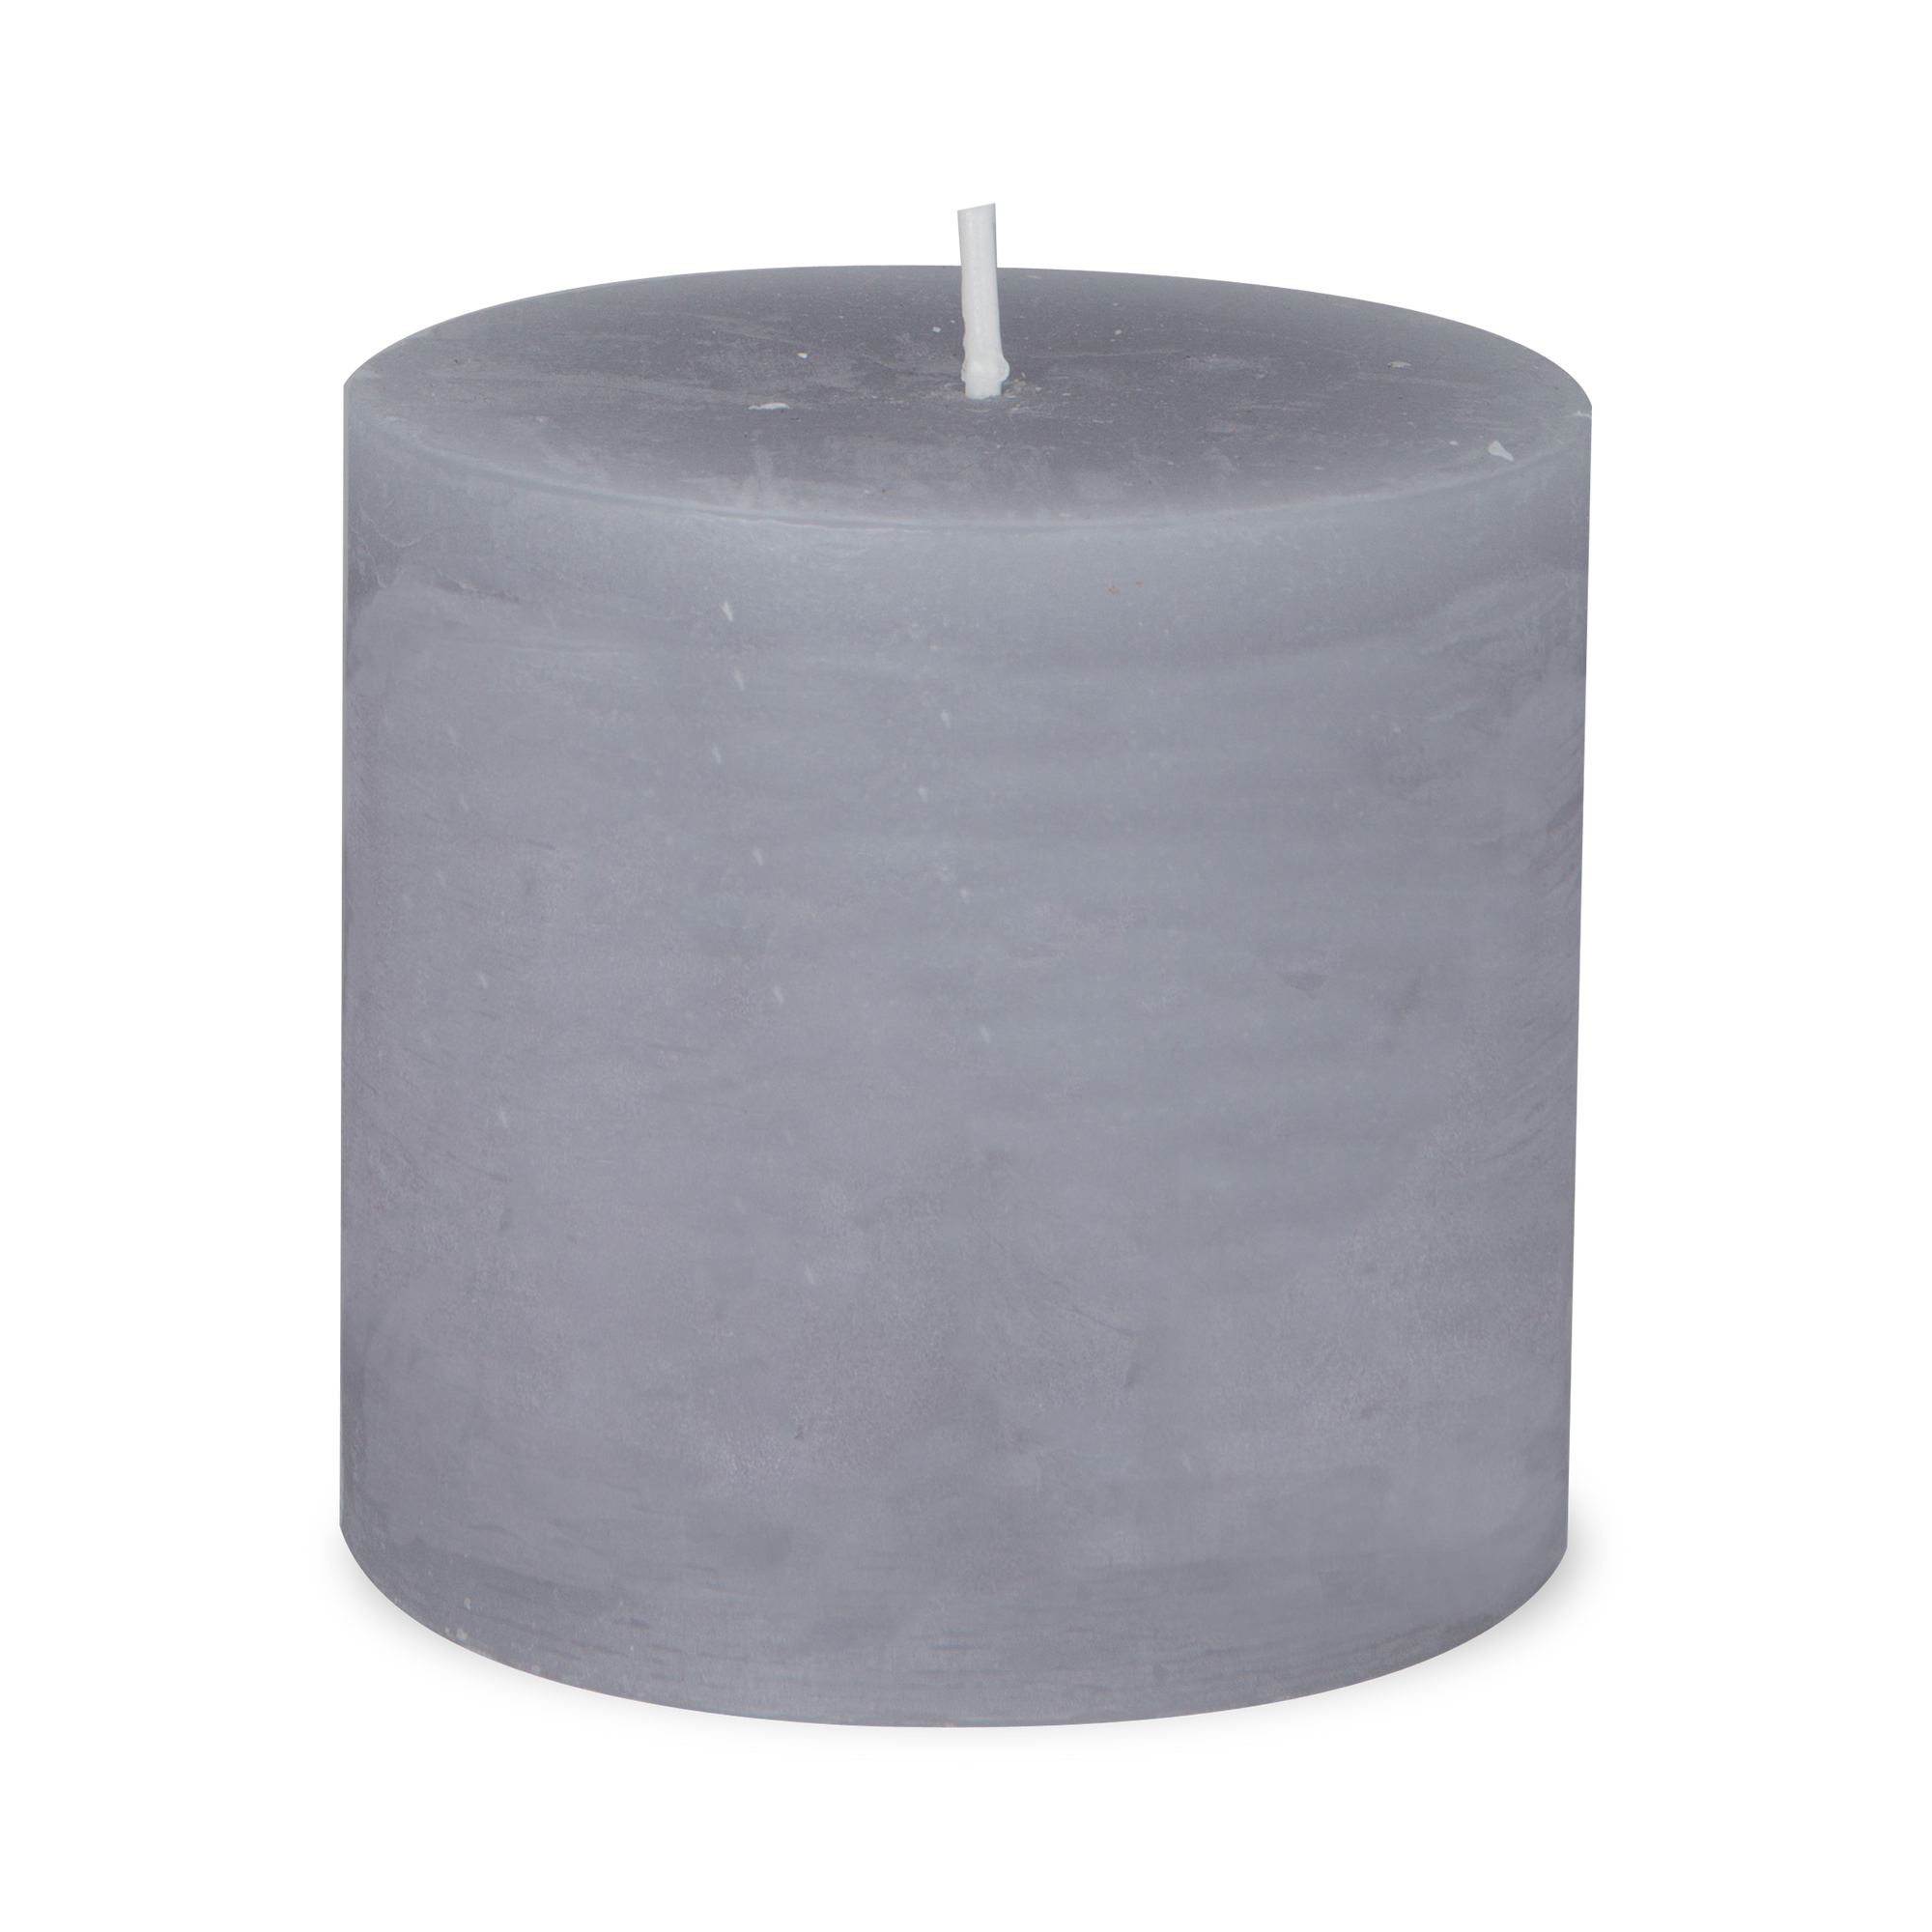 The Pillar Candle is a long-burning, fragrance free, pillar candles with a rustic textured finish, these candles are solid colour throughout.